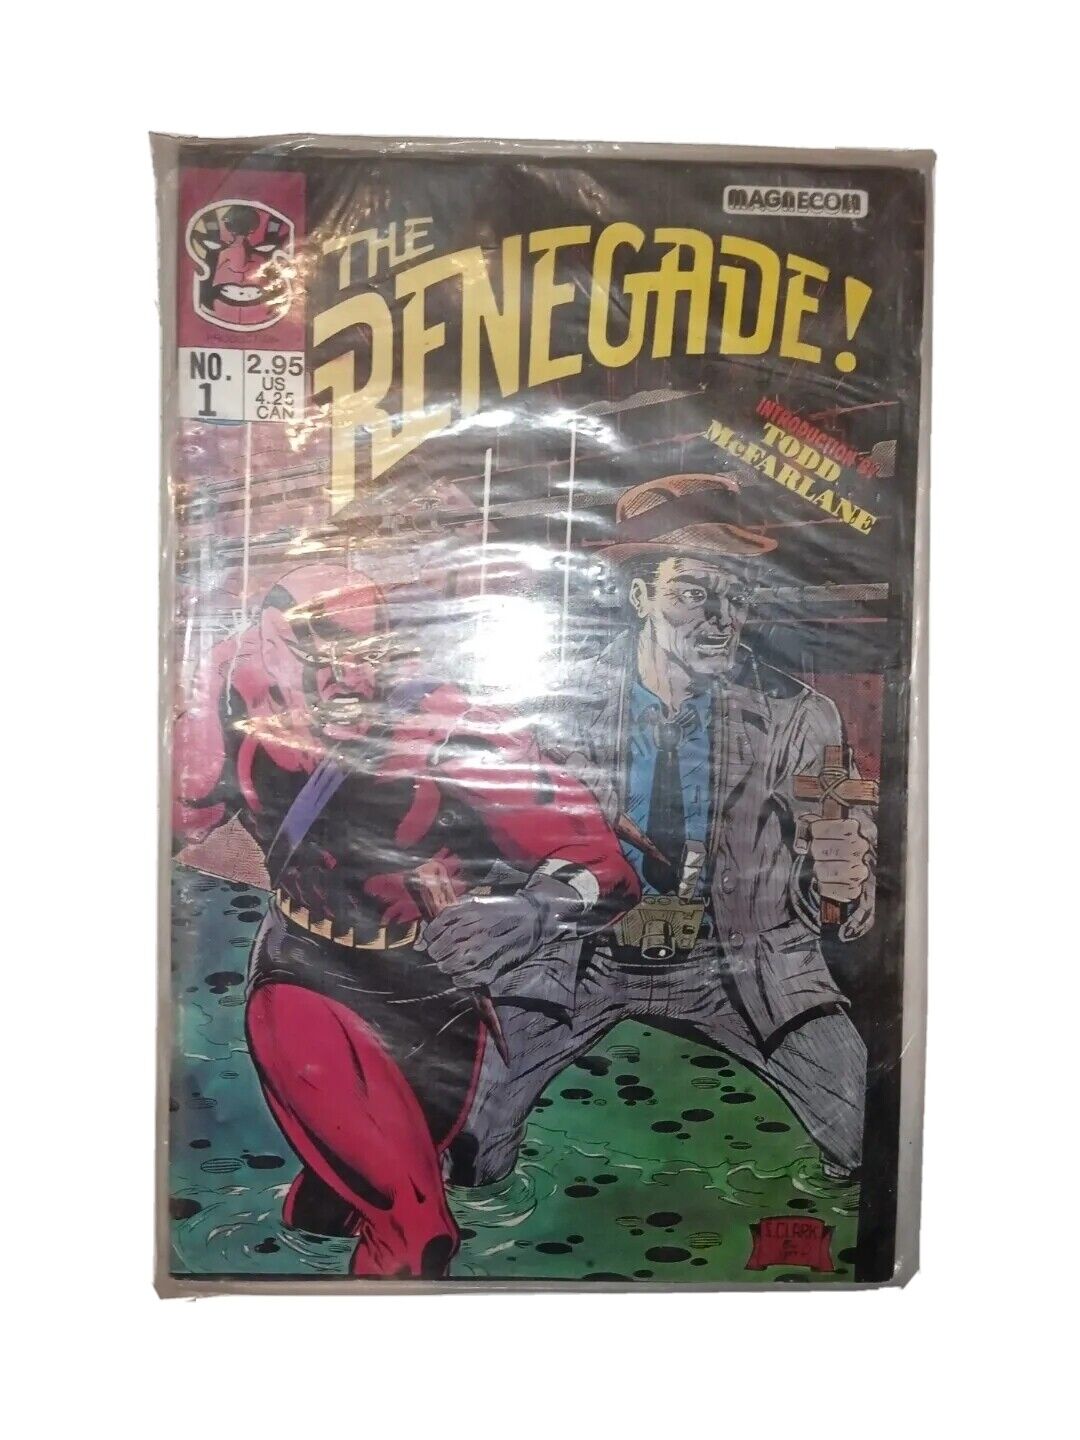 1993 The Renegade #1 Magnecom Comic | Introduction by Todd McFarlane (Sealed)